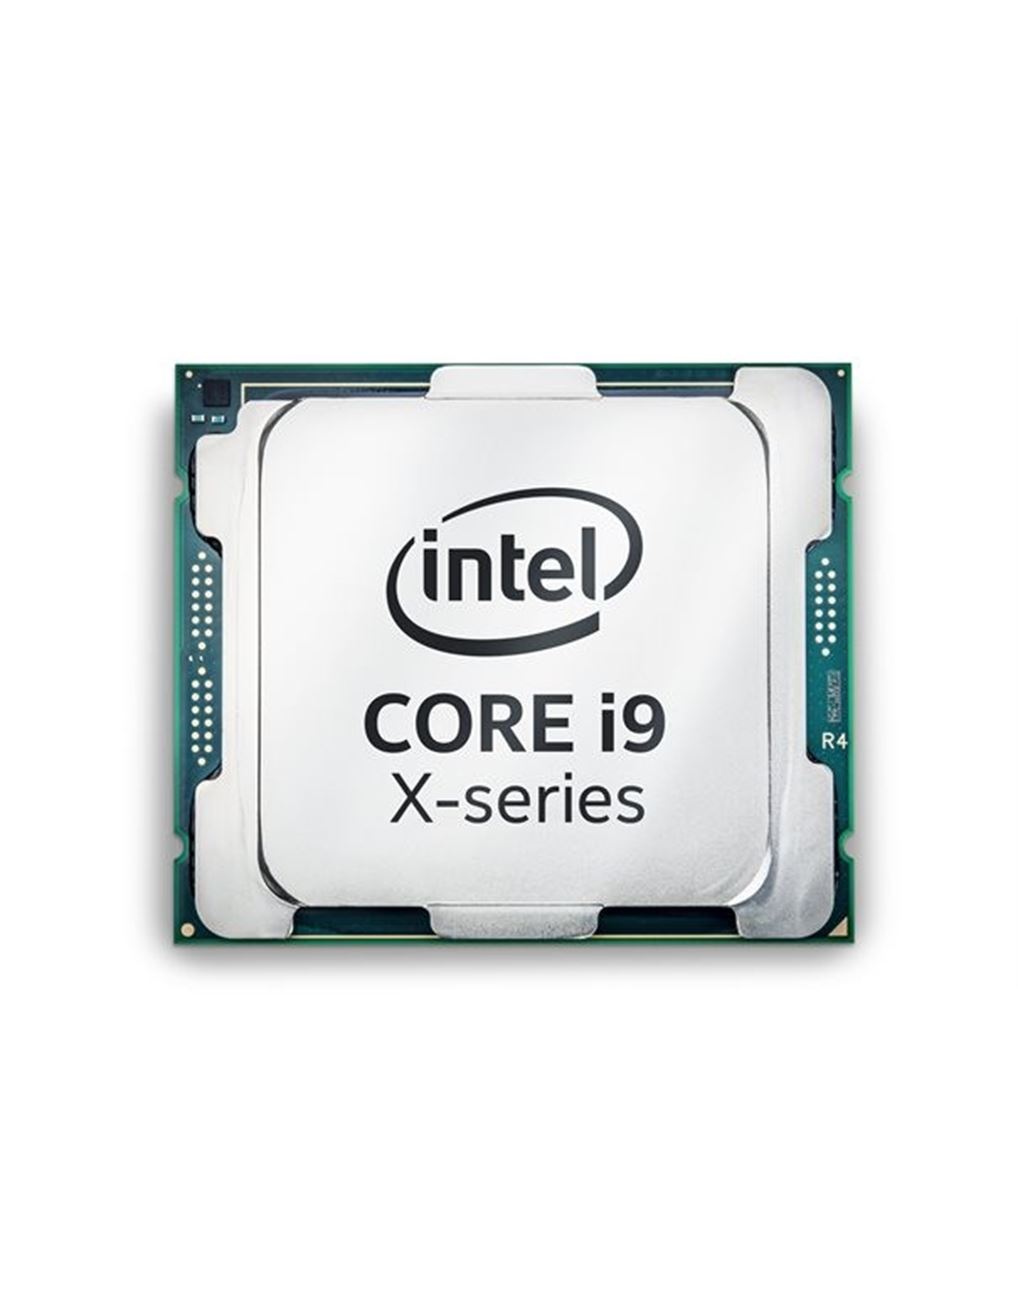 Intel Core I7-9700, 12MB Cache, 3.00 GHz (Up To 4.70 GHz), 8-Core